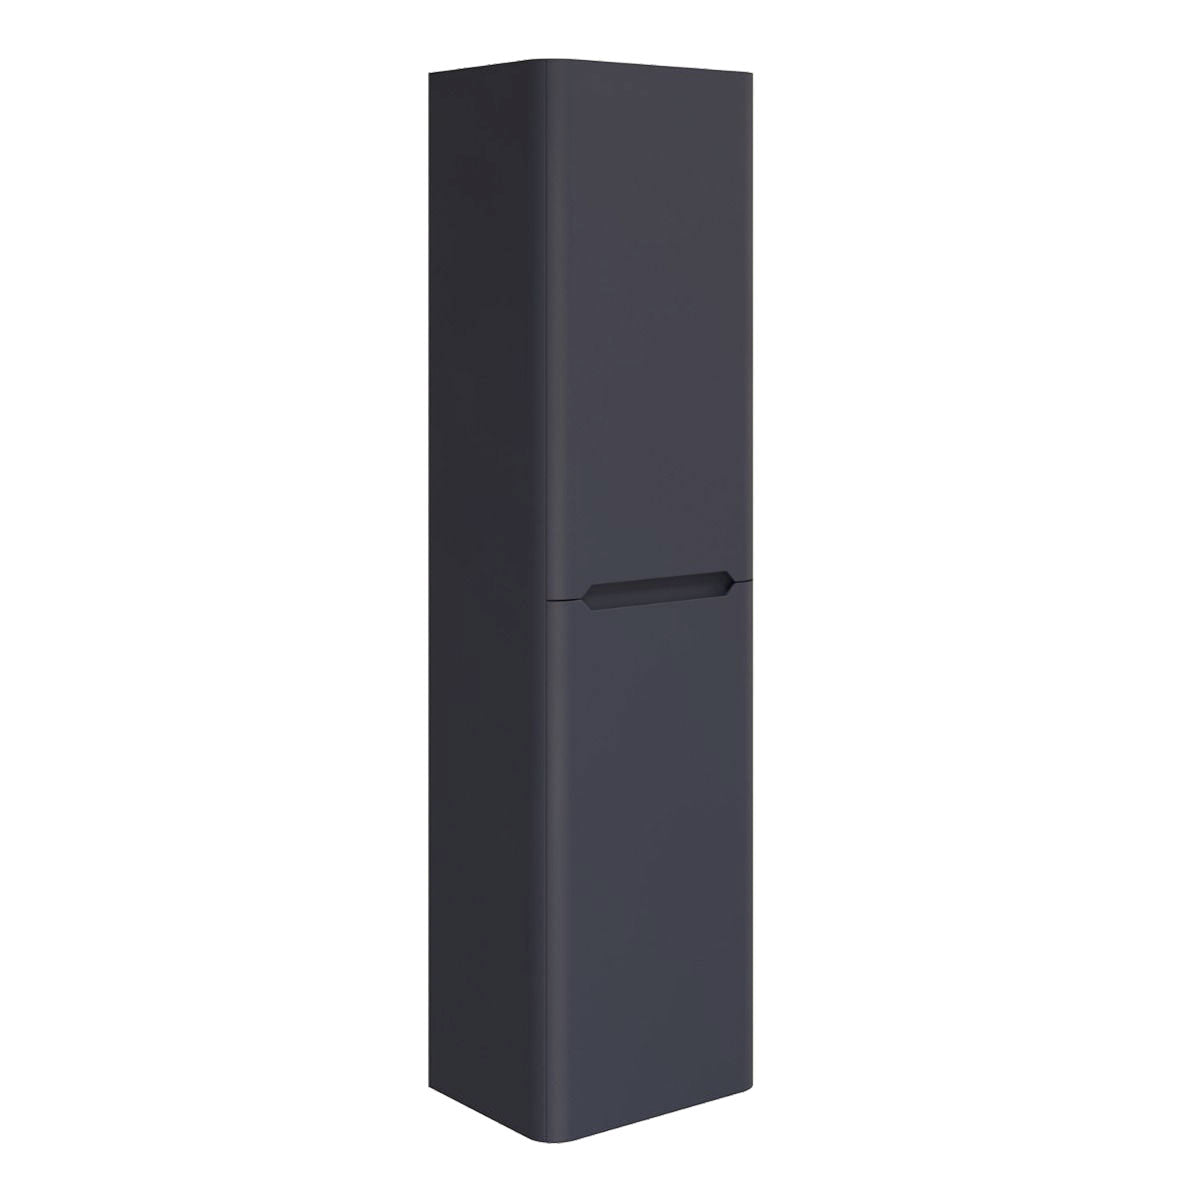 Granlusso™ Enzo Tall Storage Cabinet Wall Mounted midnight blue